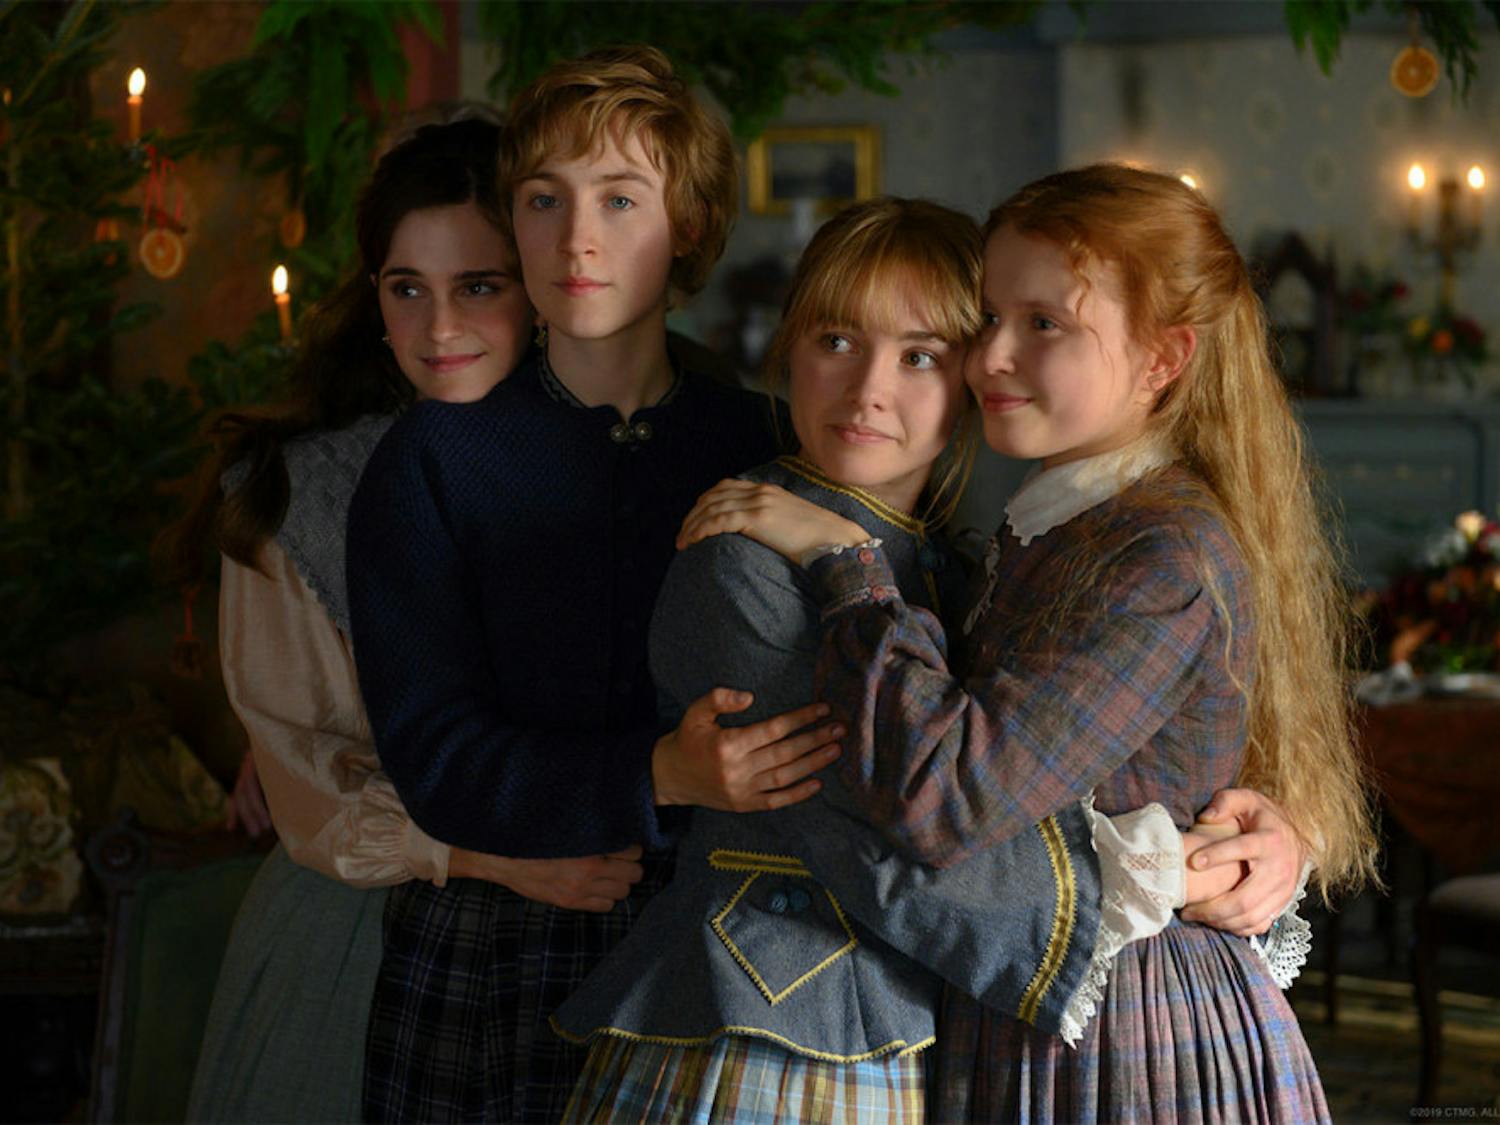 Greta Gerwig's "Little Women" is one of the films competing for Best Picture at the upcoming 92nd Academy Awards. Soairse Ronan, who plays Jo March, is also nominated for Actress in a Leading Role.&nbsp;